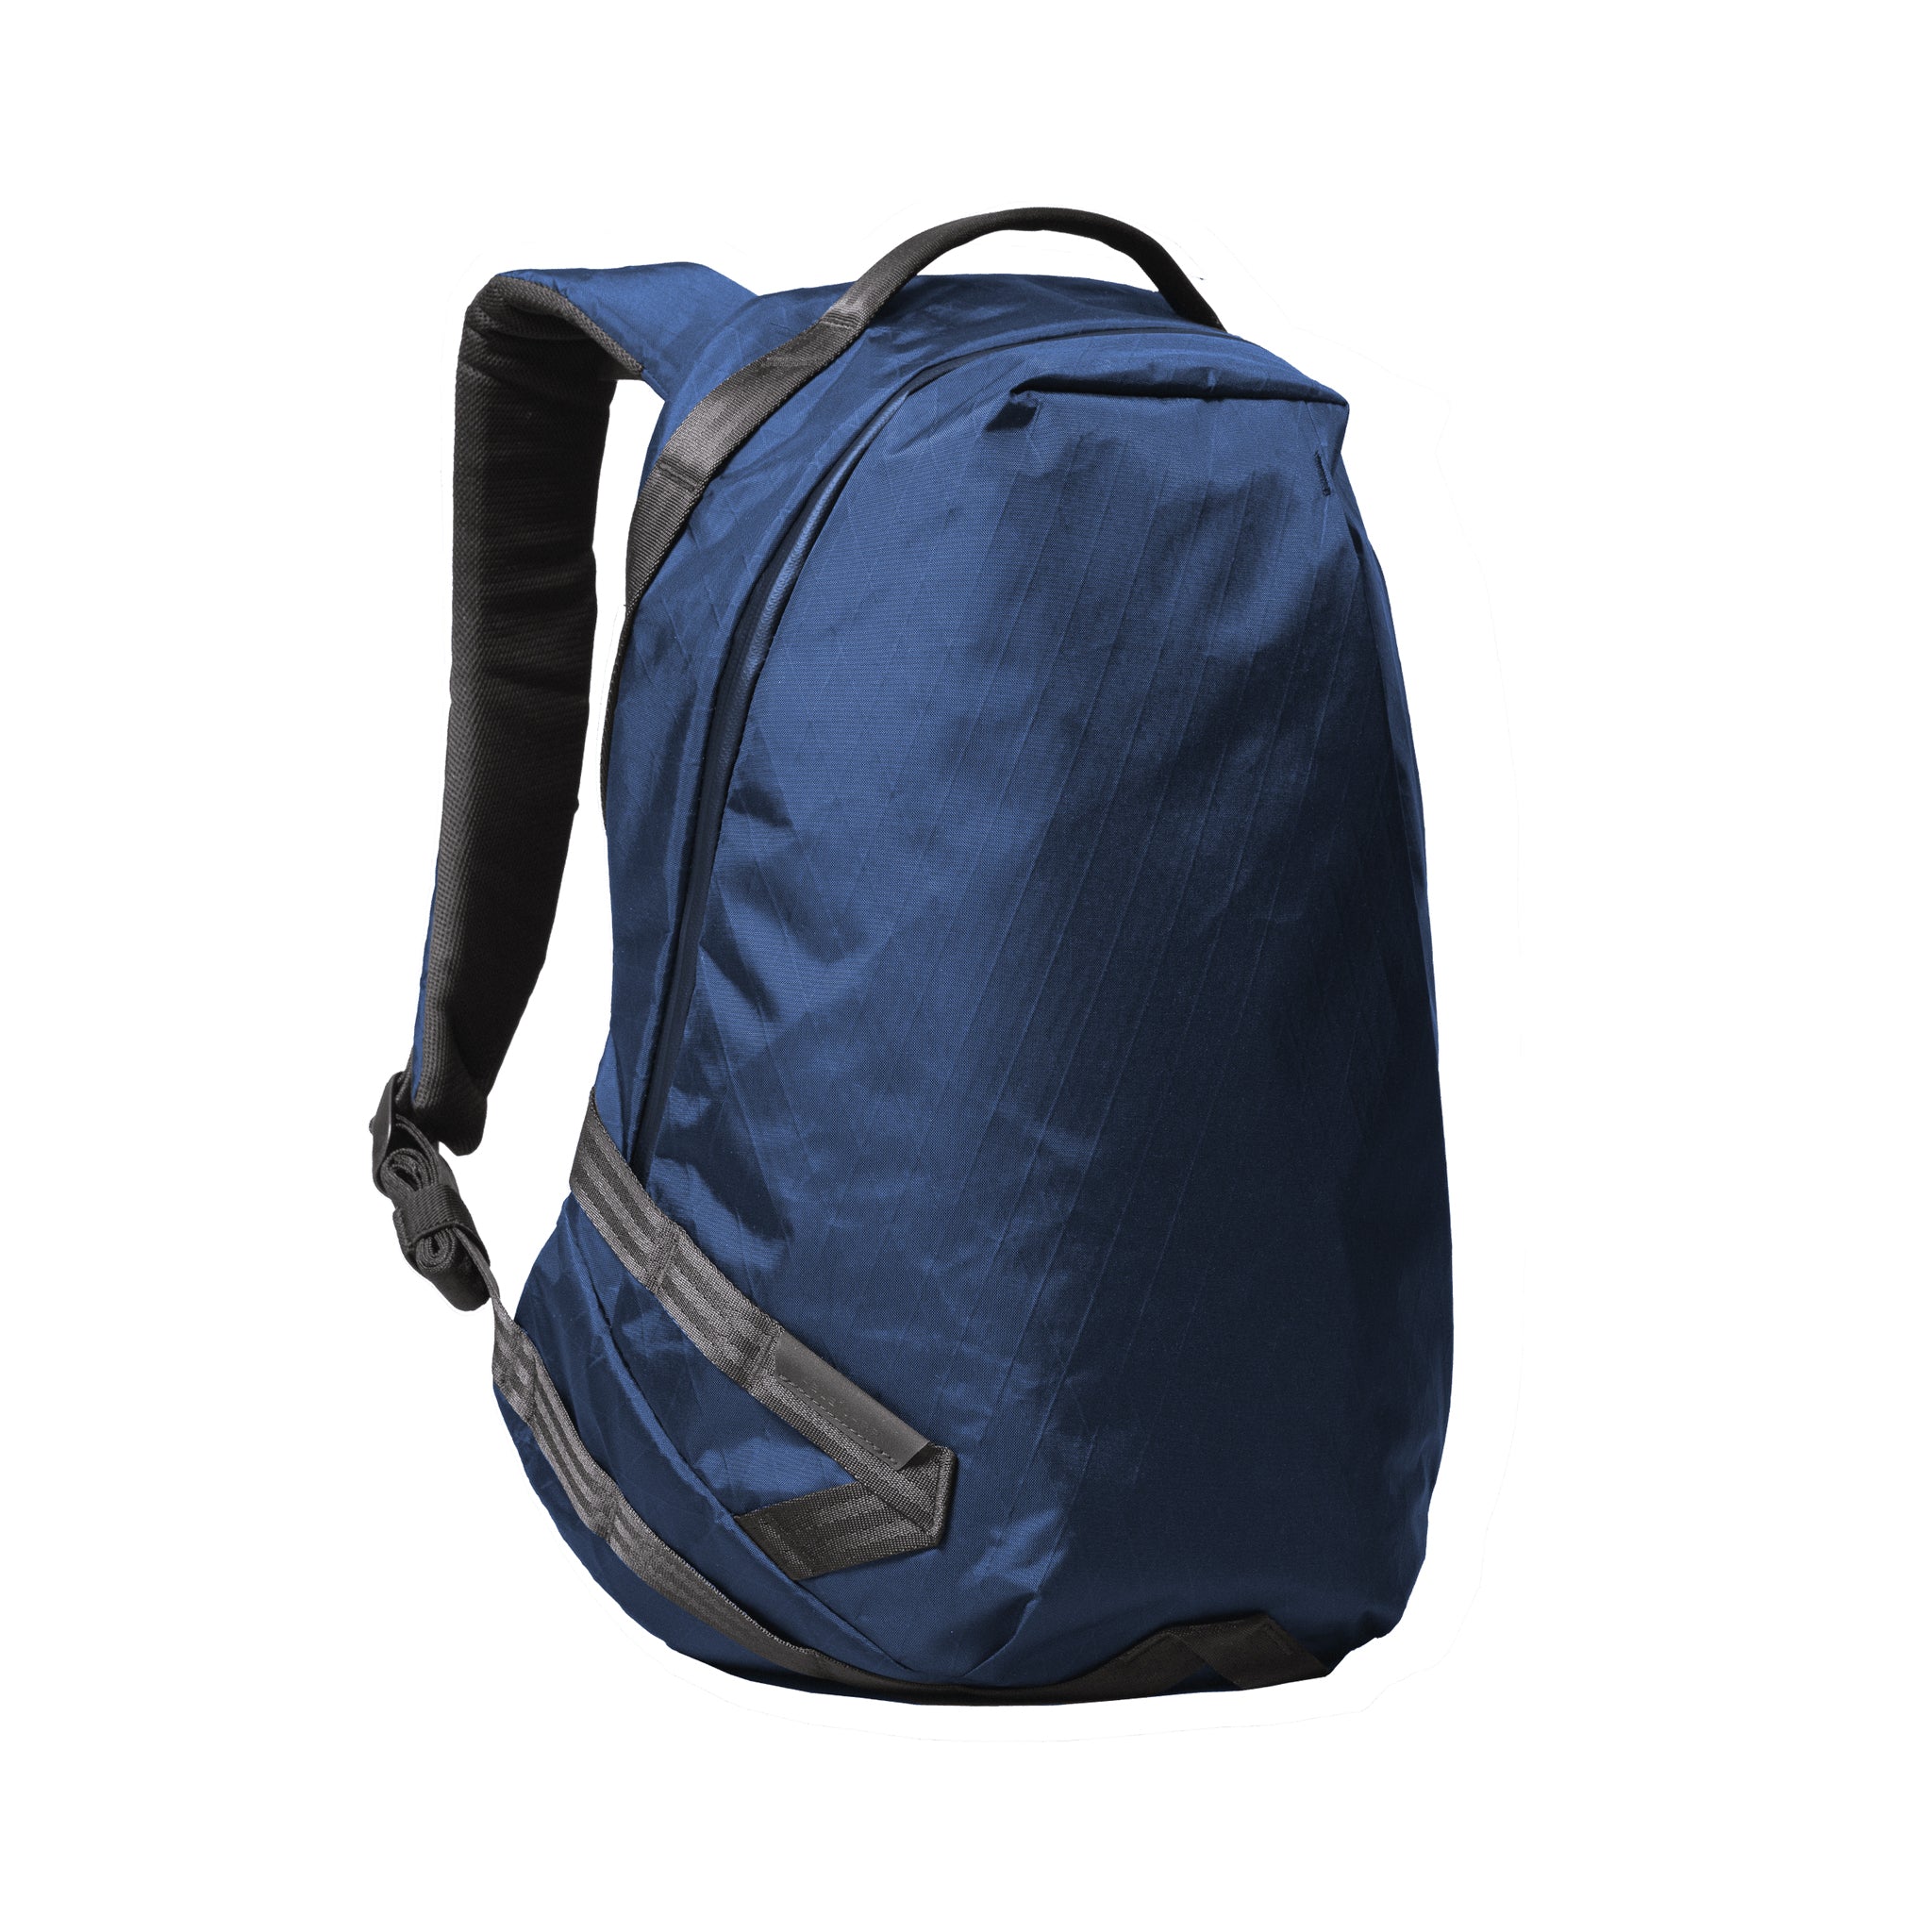 ABLE CARRY DAILY PLUS BACKPACK - NAVY – Prime Skateboard